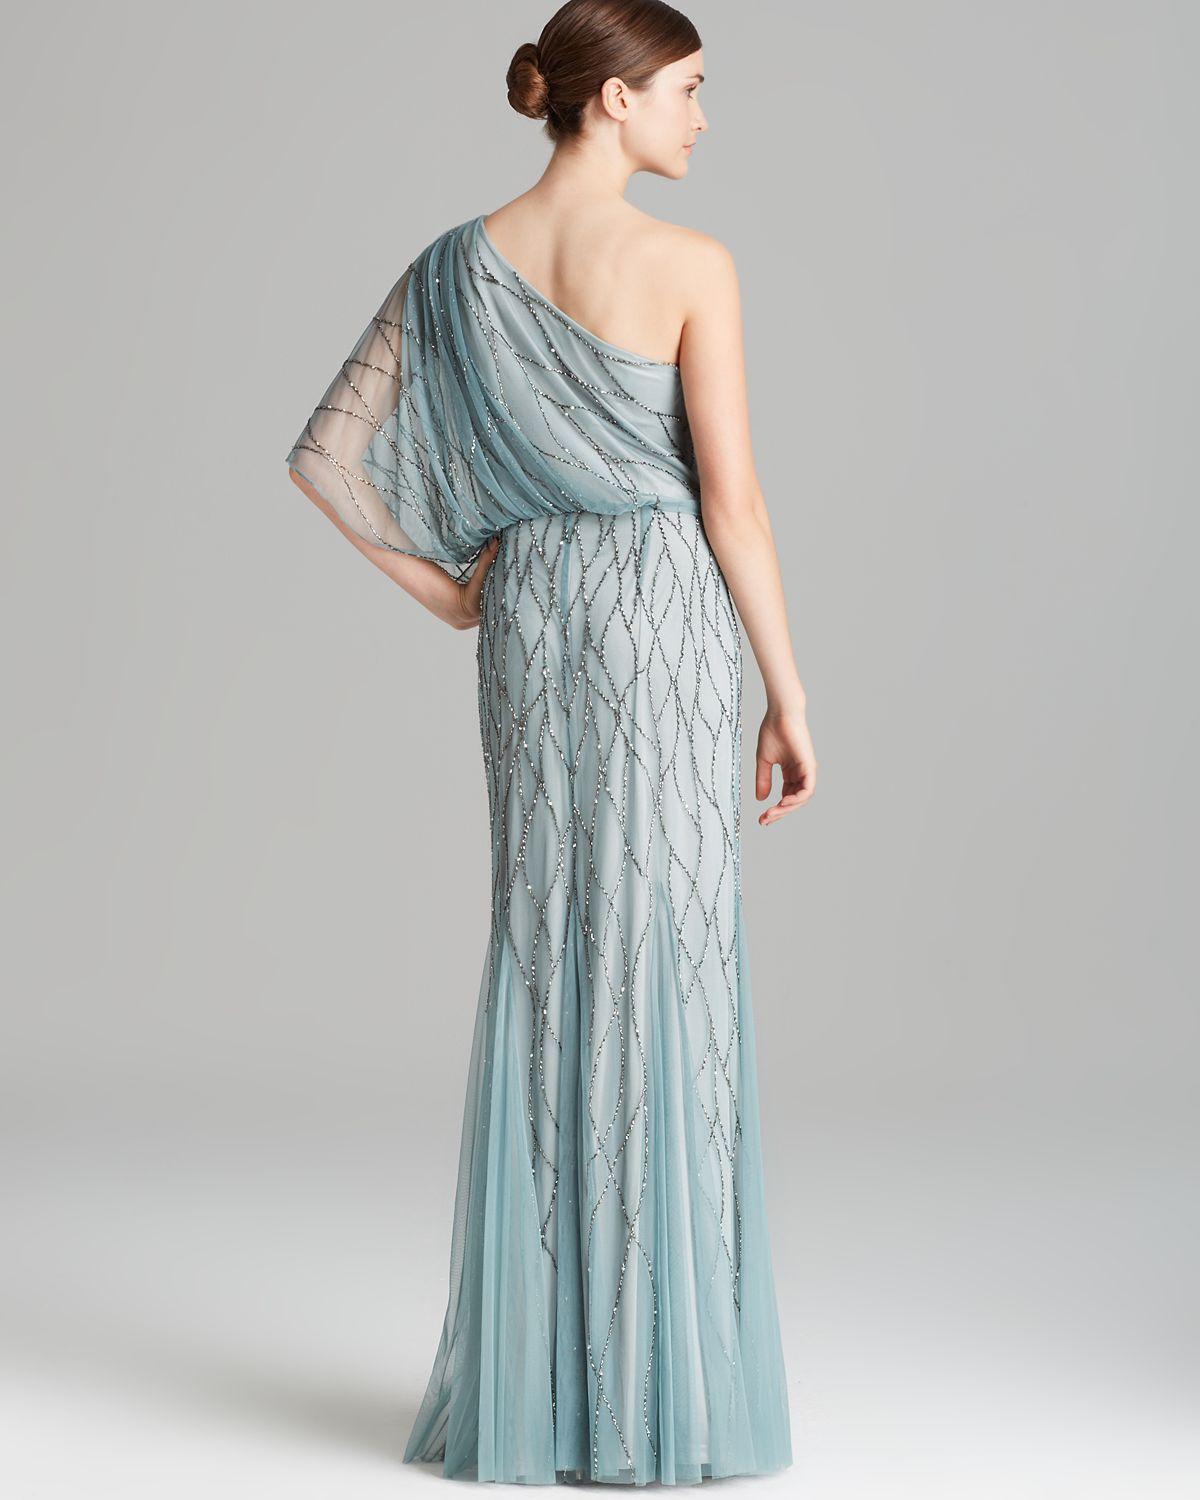 Adrianna Papell Gown One Shoulder Blouson with Beaded Mesh in 